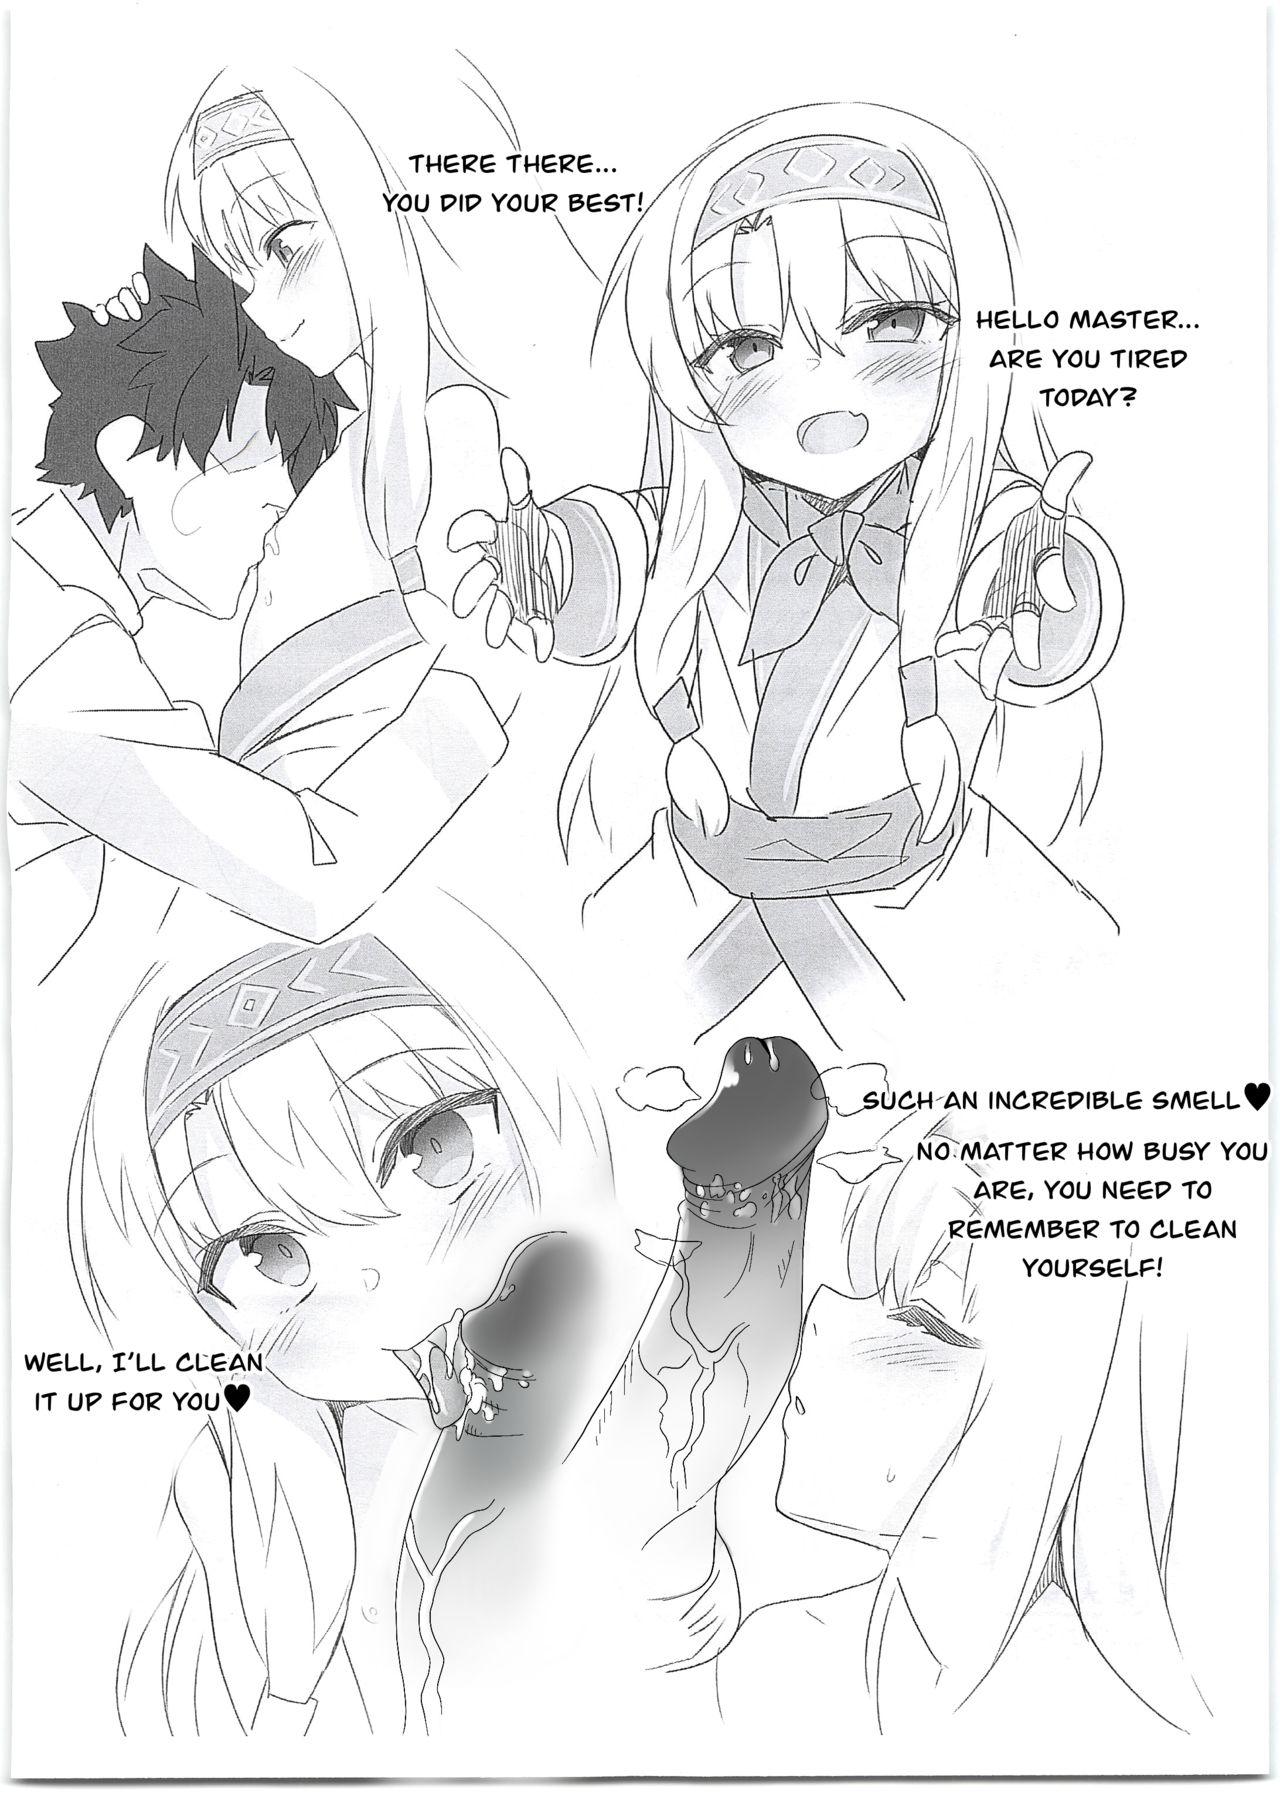 Asian Kaijou Gentei Omakebon Pit In 03 - Fate grand order Throat - Page 2